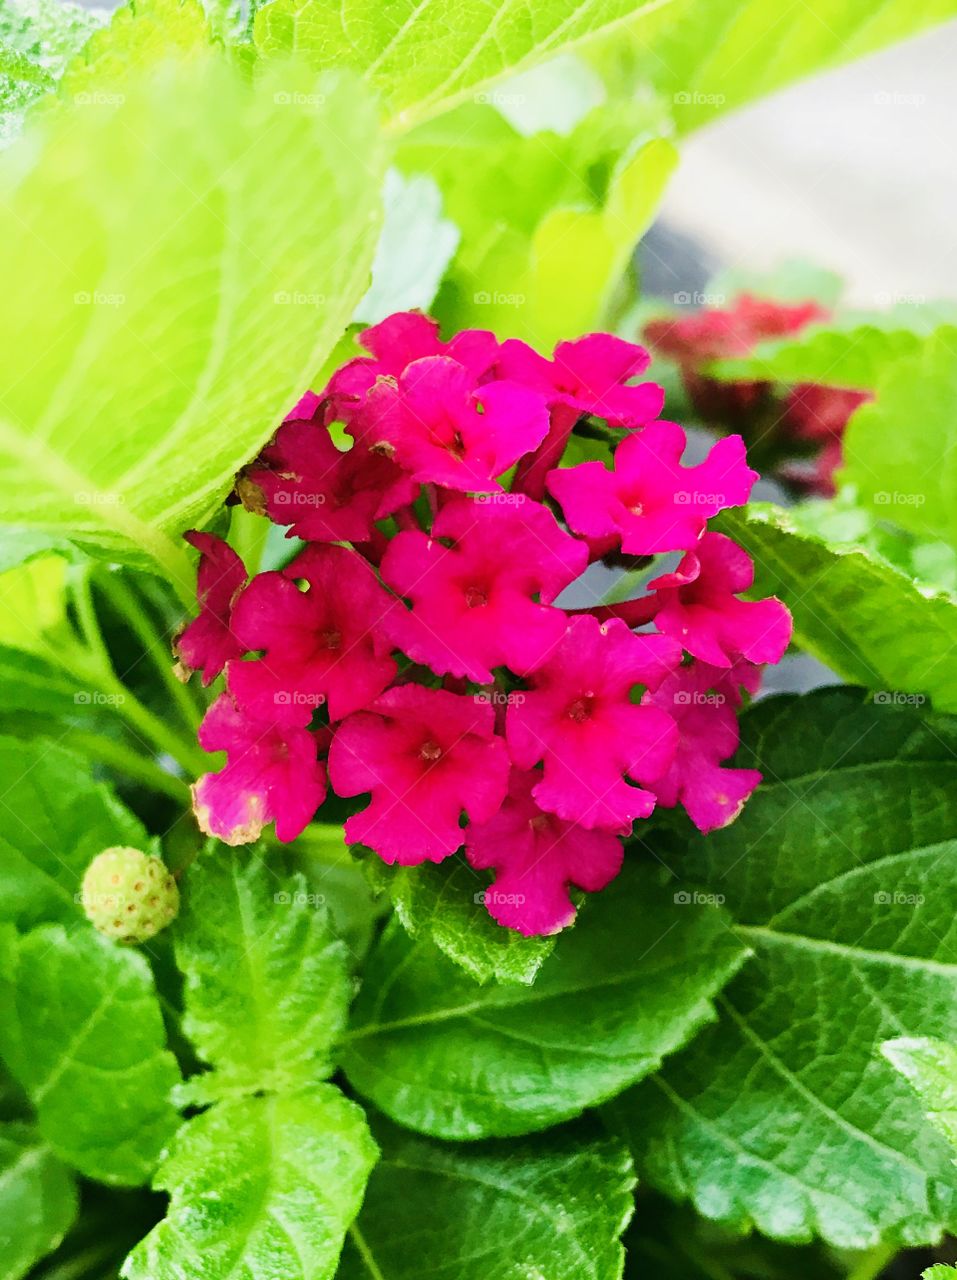 Hot Pink Flower Bright Green Leaves